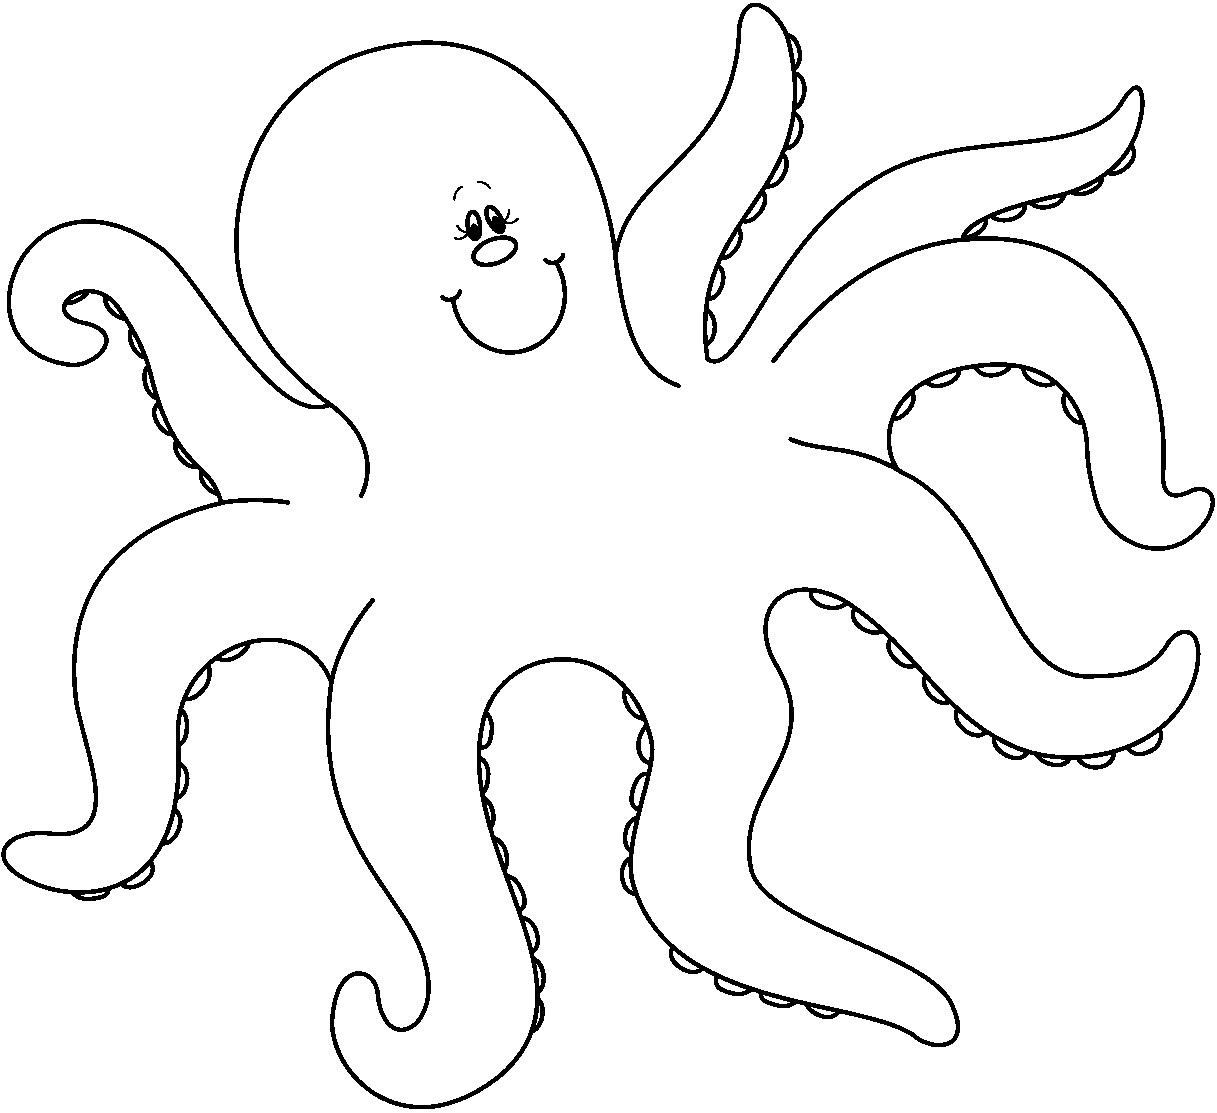 Free octopus clipart.